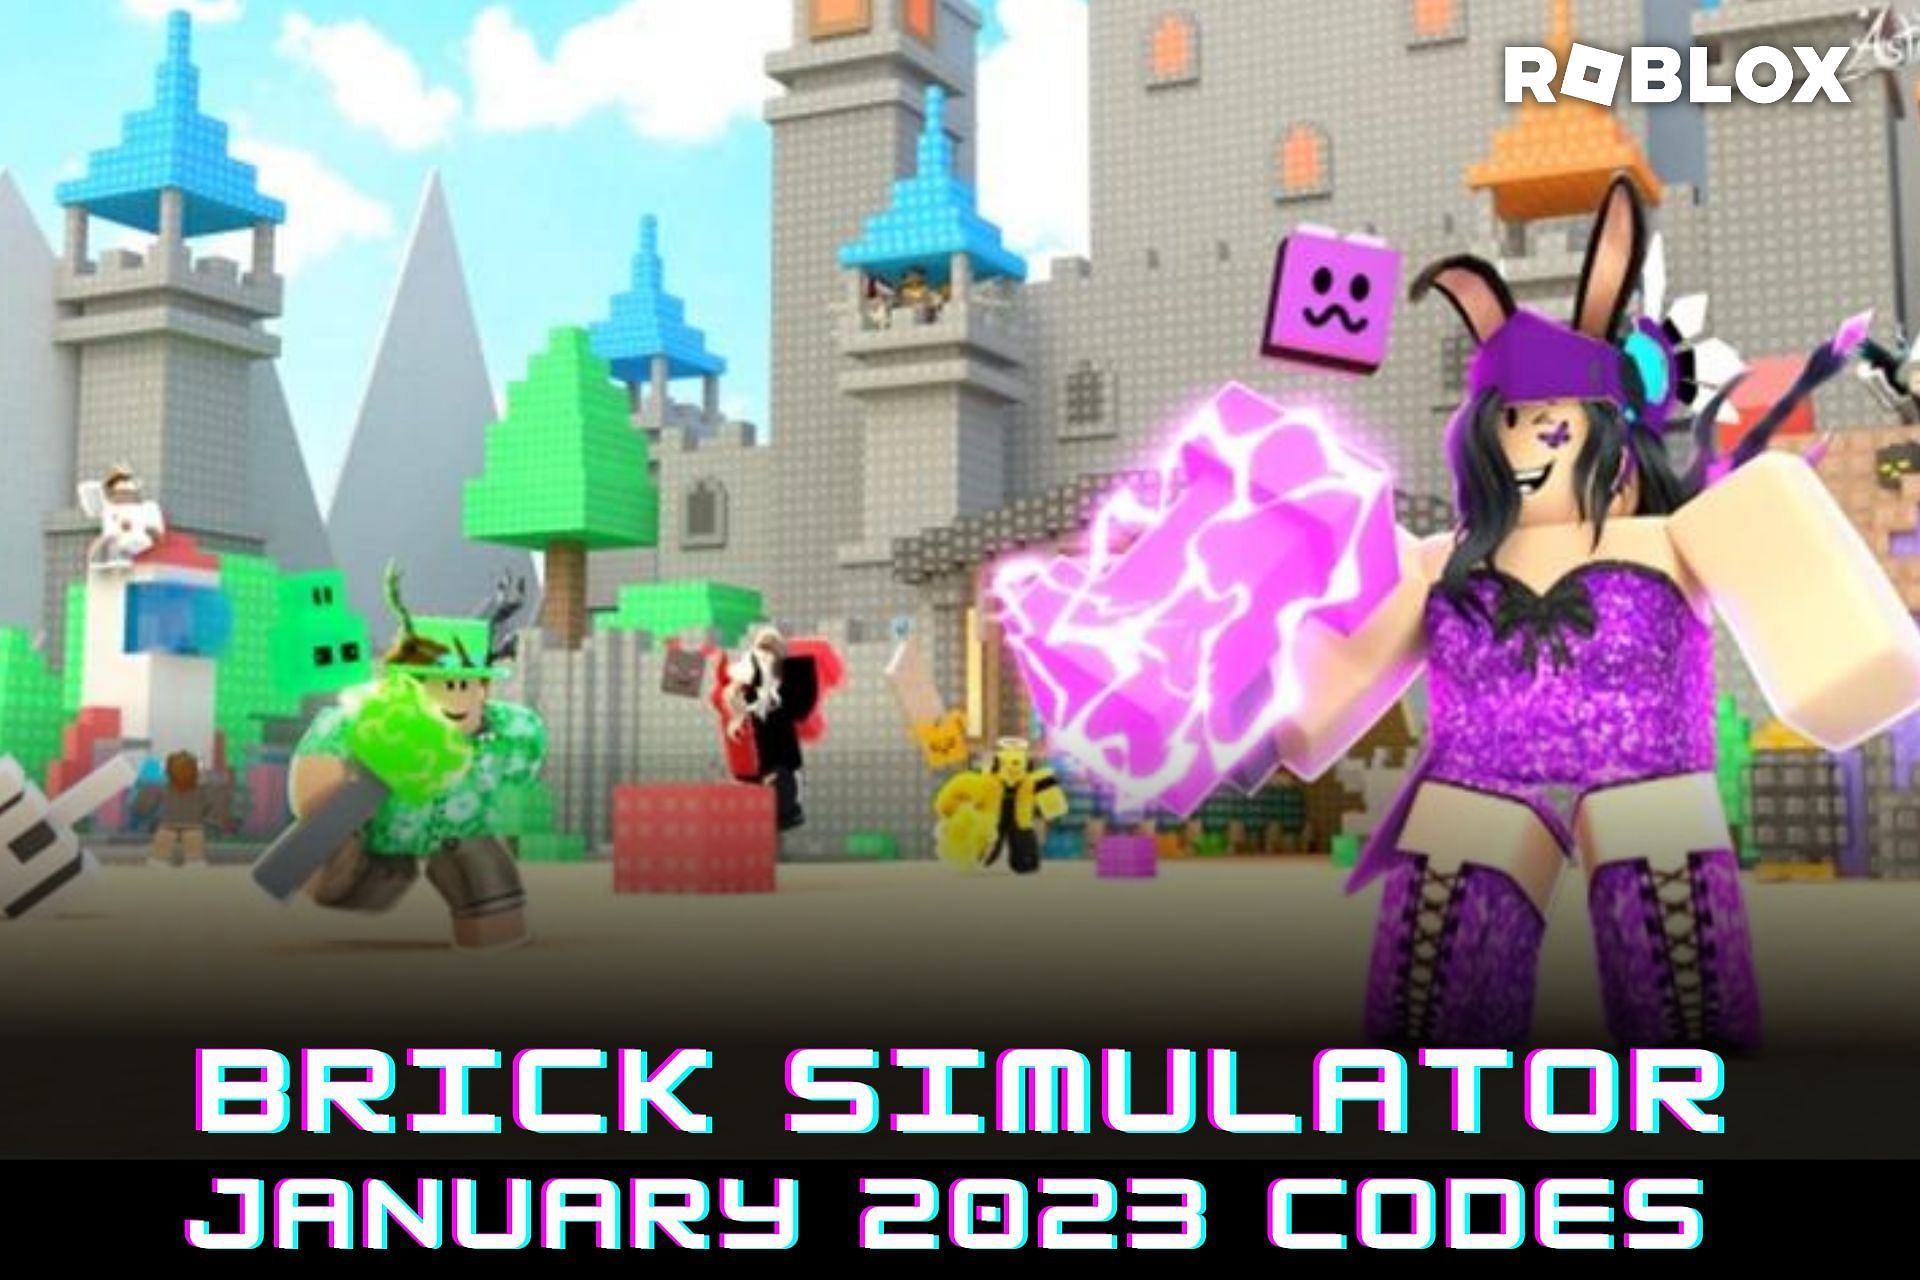 Roblox Freeze Simulator codes (September 2023): Free Coins, Gems, pets, and  more